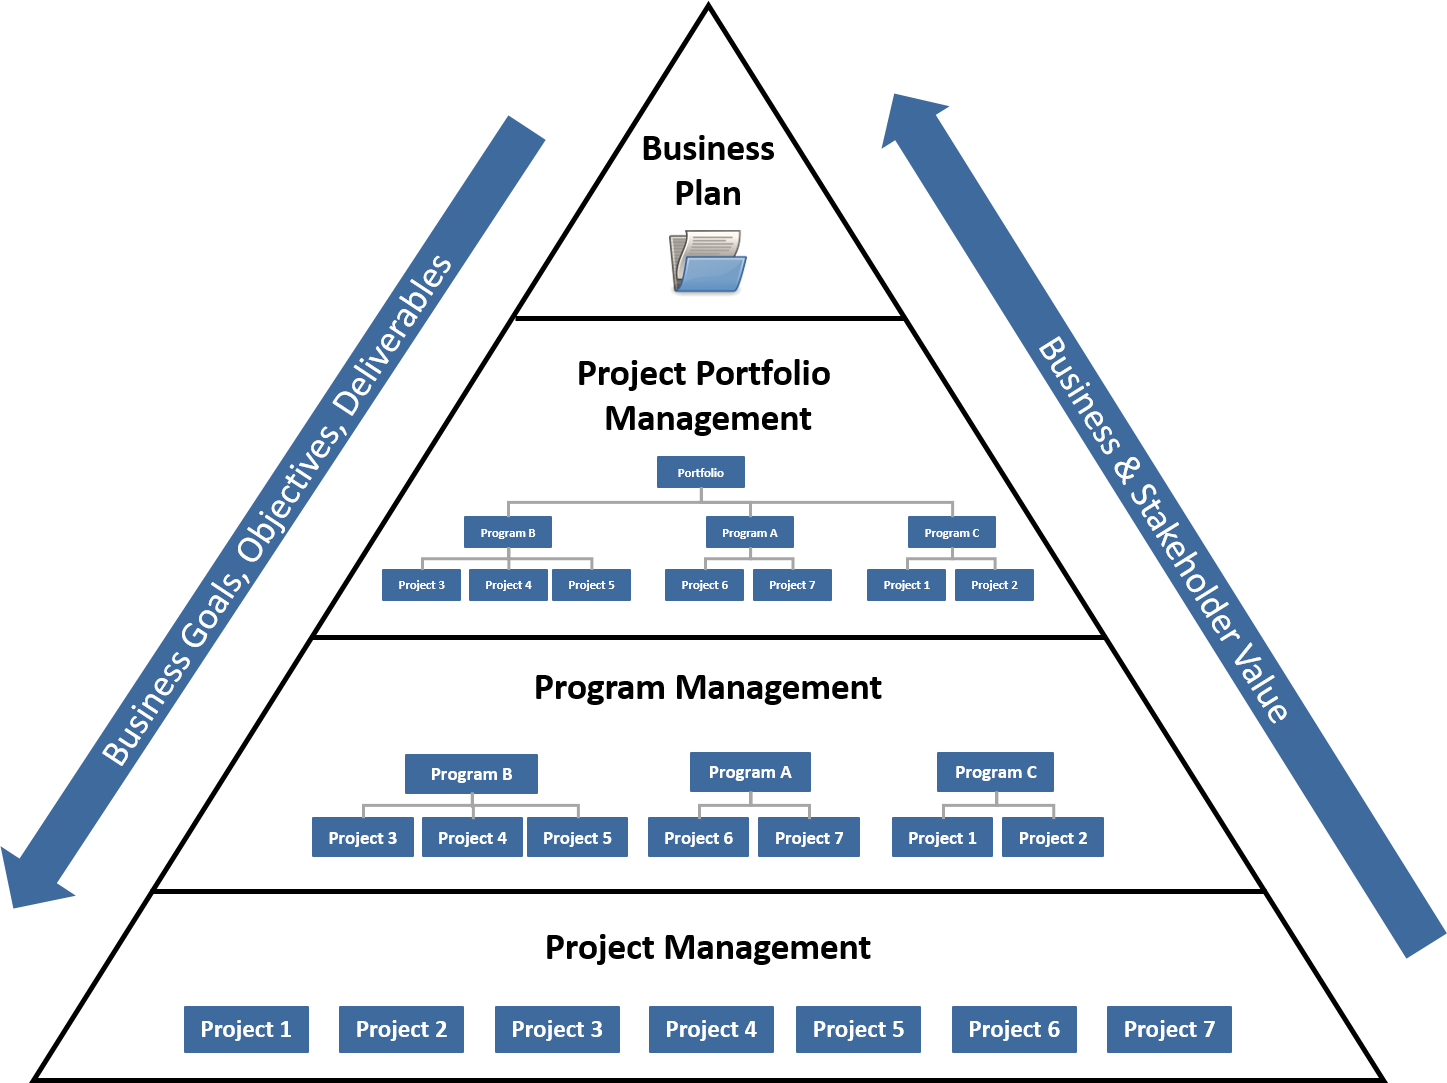 Organizational Project Management Framework triangle. At the bottom is Project Management with individual, separate projects. The next level is Program Management, where the projects are connected into groups as programs.  The next level is Portfolio Management, where the projects are connected into groups as programs, and the programs are connected to an overall portfolio.  The top level is the business plan. As you go up the triangle, there is more alignment to business and stakeholder value. As you go down the triangle, the alignment is more to the business unit's goals, objectives, and deliverables.